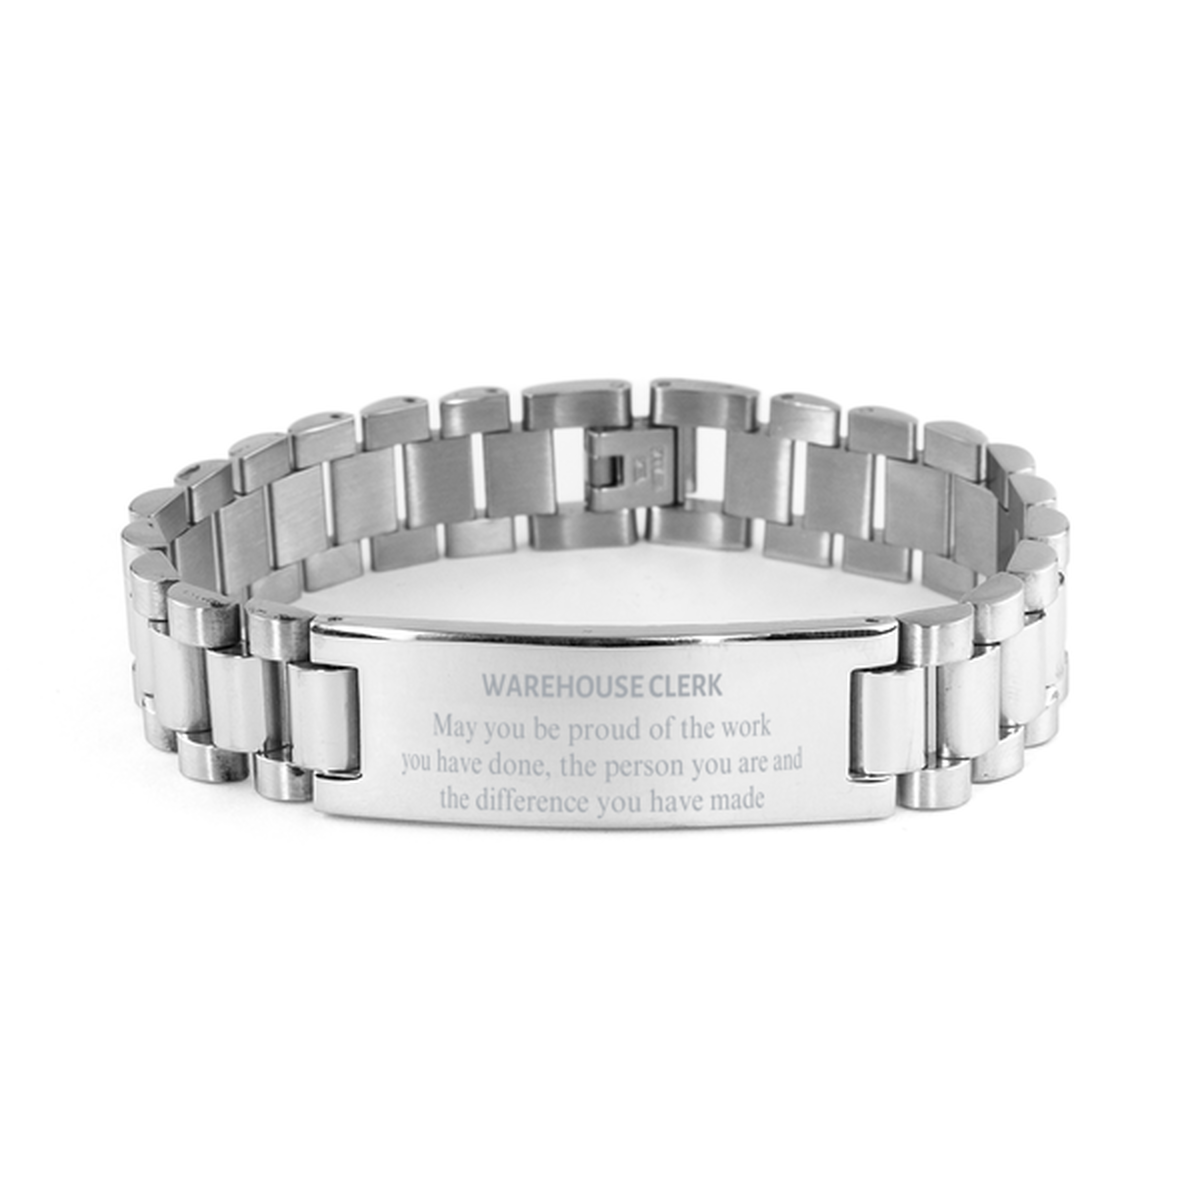 Warehouse Clerk May you be proud of the work you have done, Retirement Warehouse Clerk Ladder Stainless Steel Bracelet for Colleague Appreciation Gifts Amazing for Warehouse Clerk